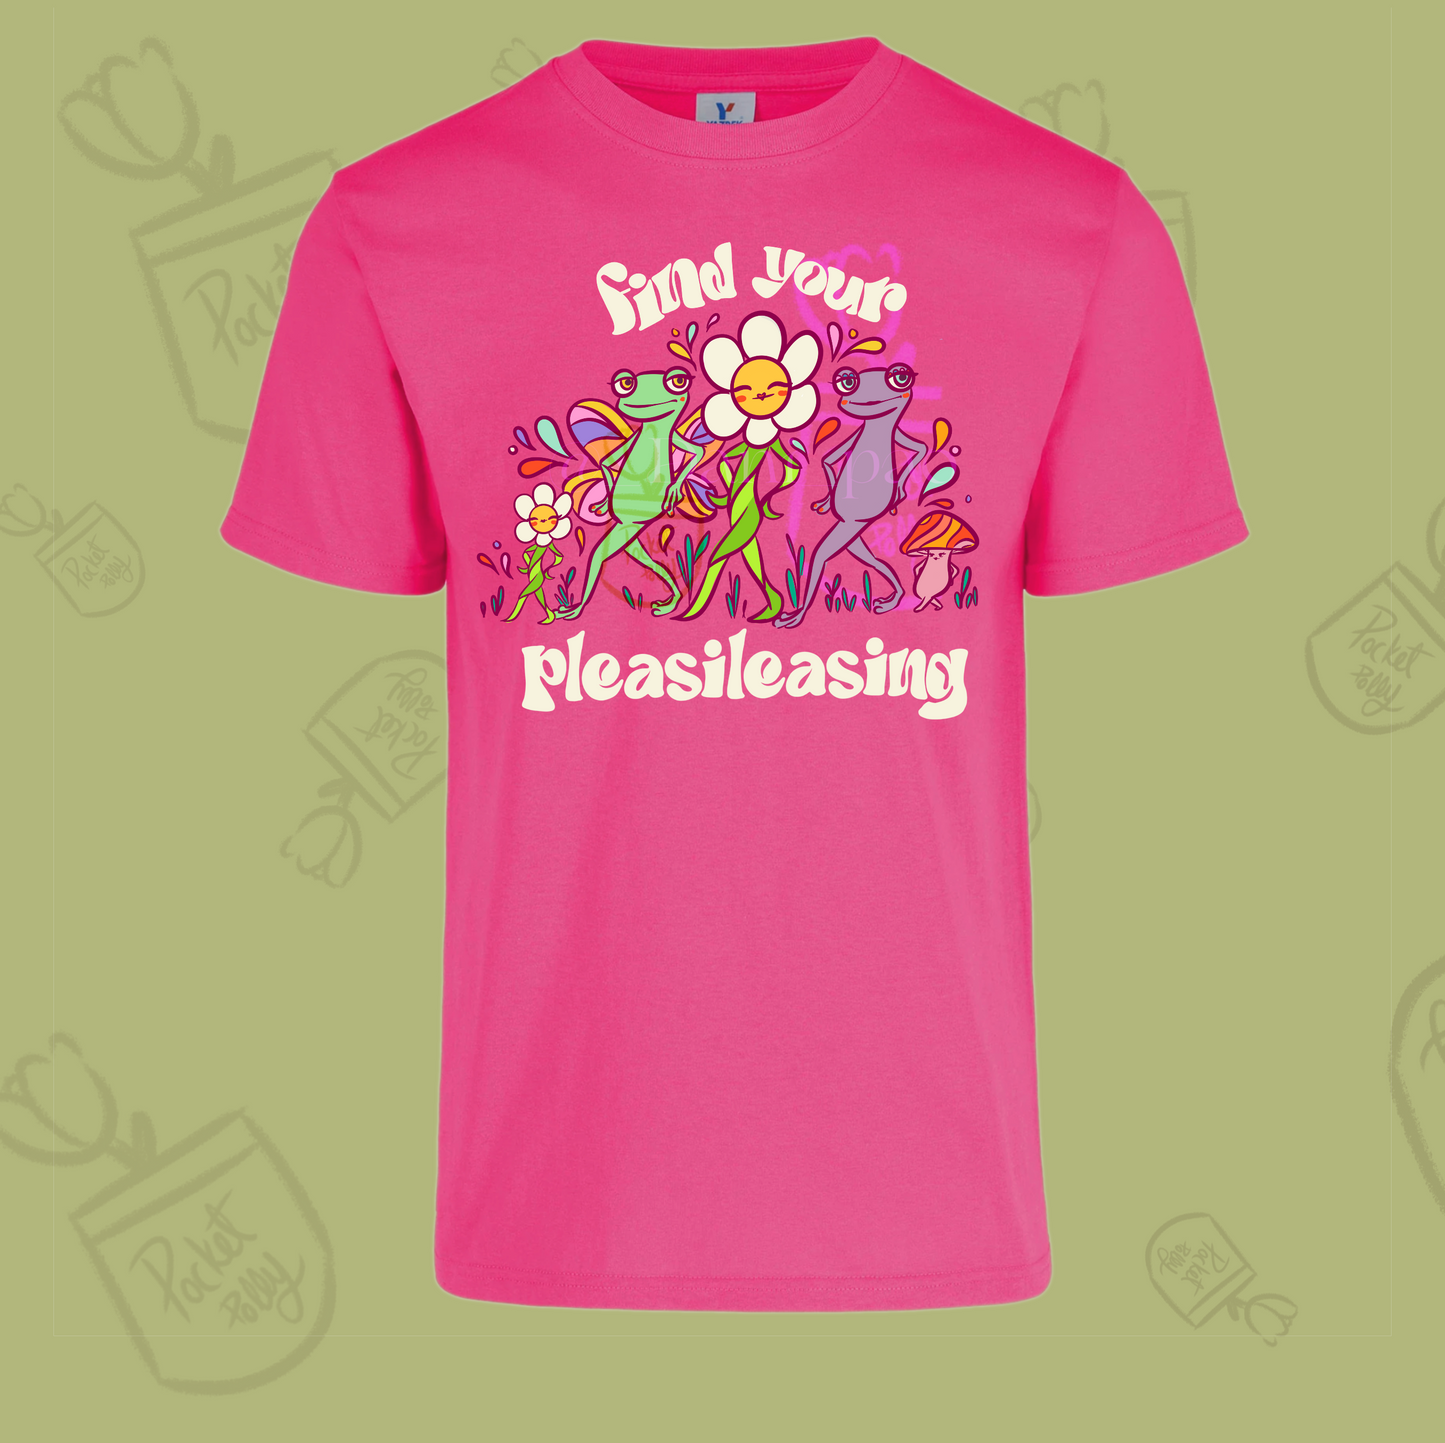 Find your pleasileasing Harry styles Shirt